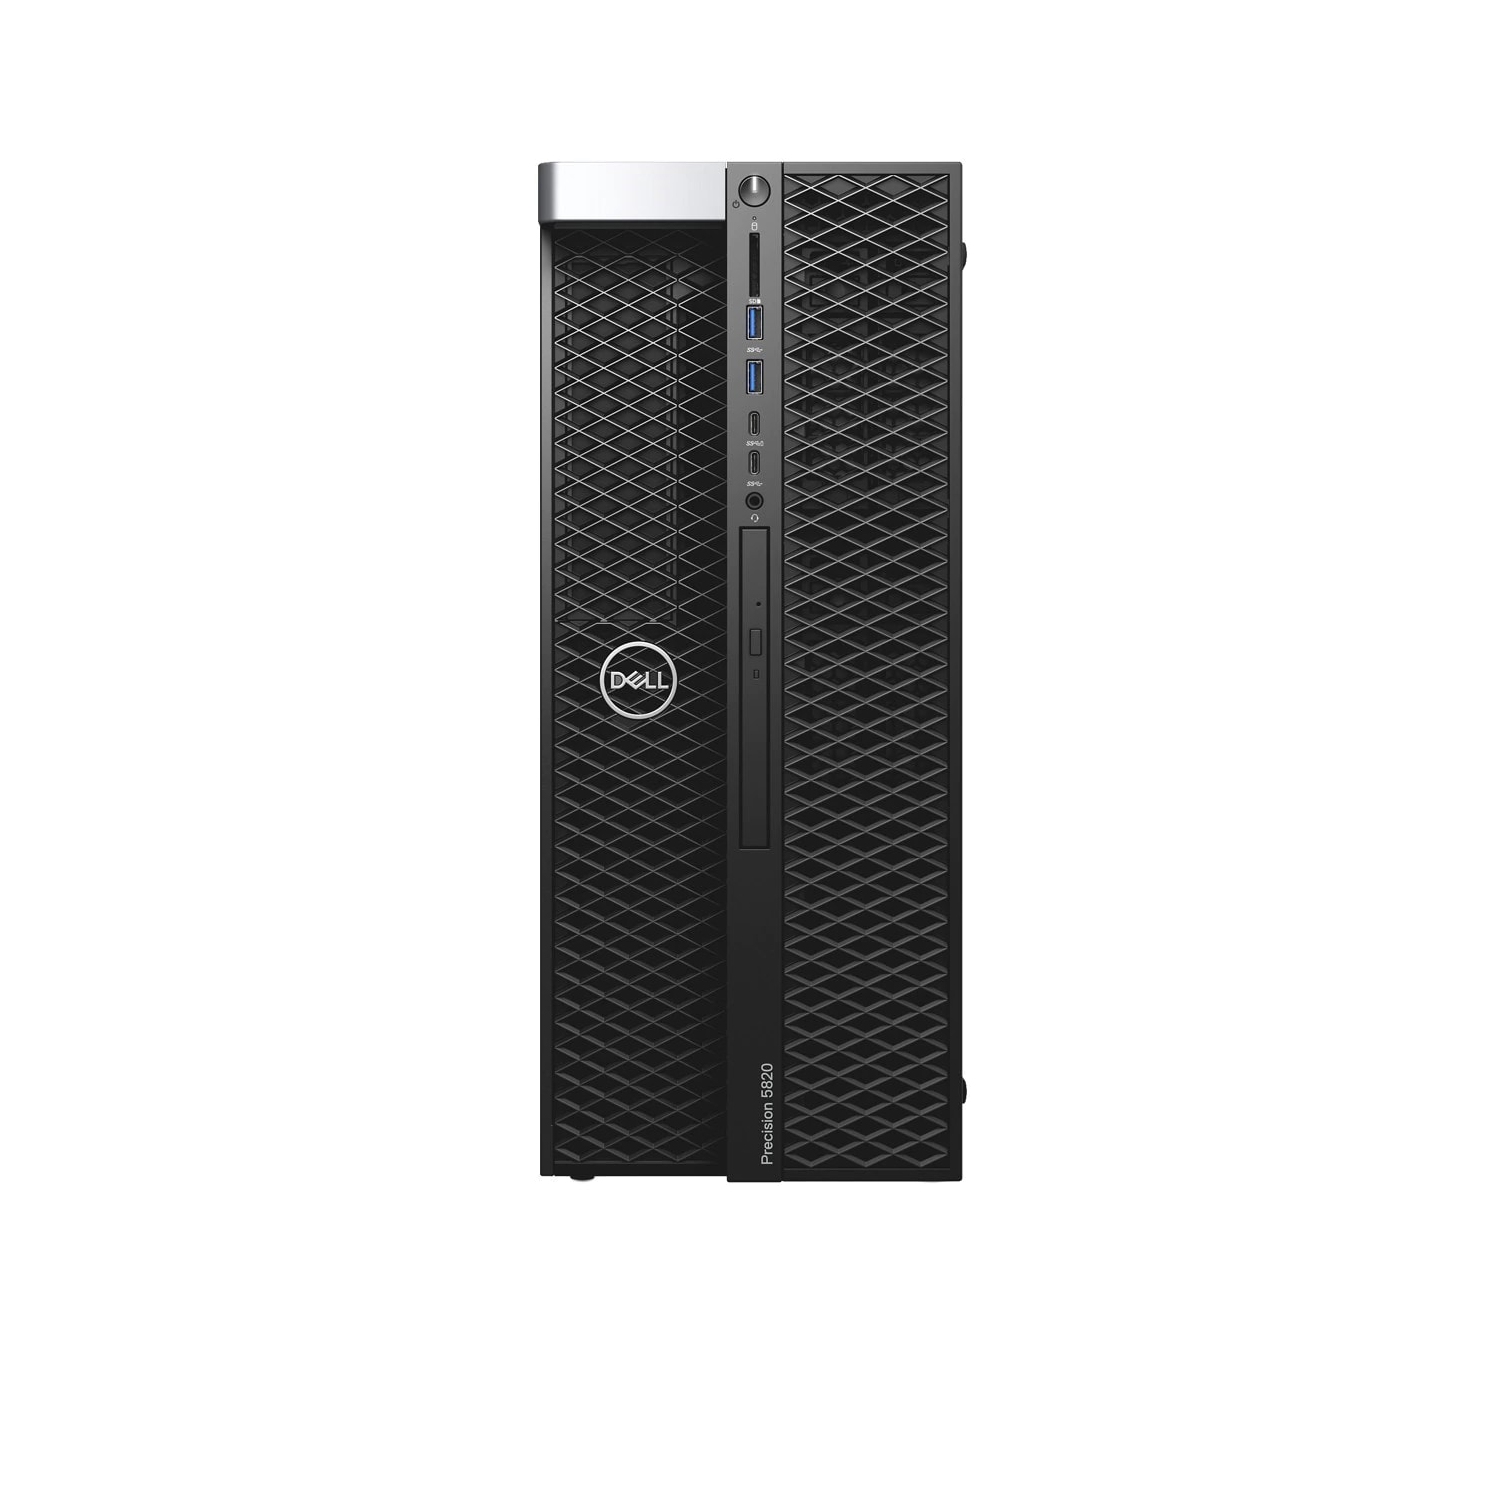 Refurbished (Excellent) - Dell Precision T5820 Workstation Desktop (2018), Core i9, 500GB HDD, 64GB RAM, Quadro P2200, 10 Cores @ 4.5 GHz, 10th Gen CPU Certified